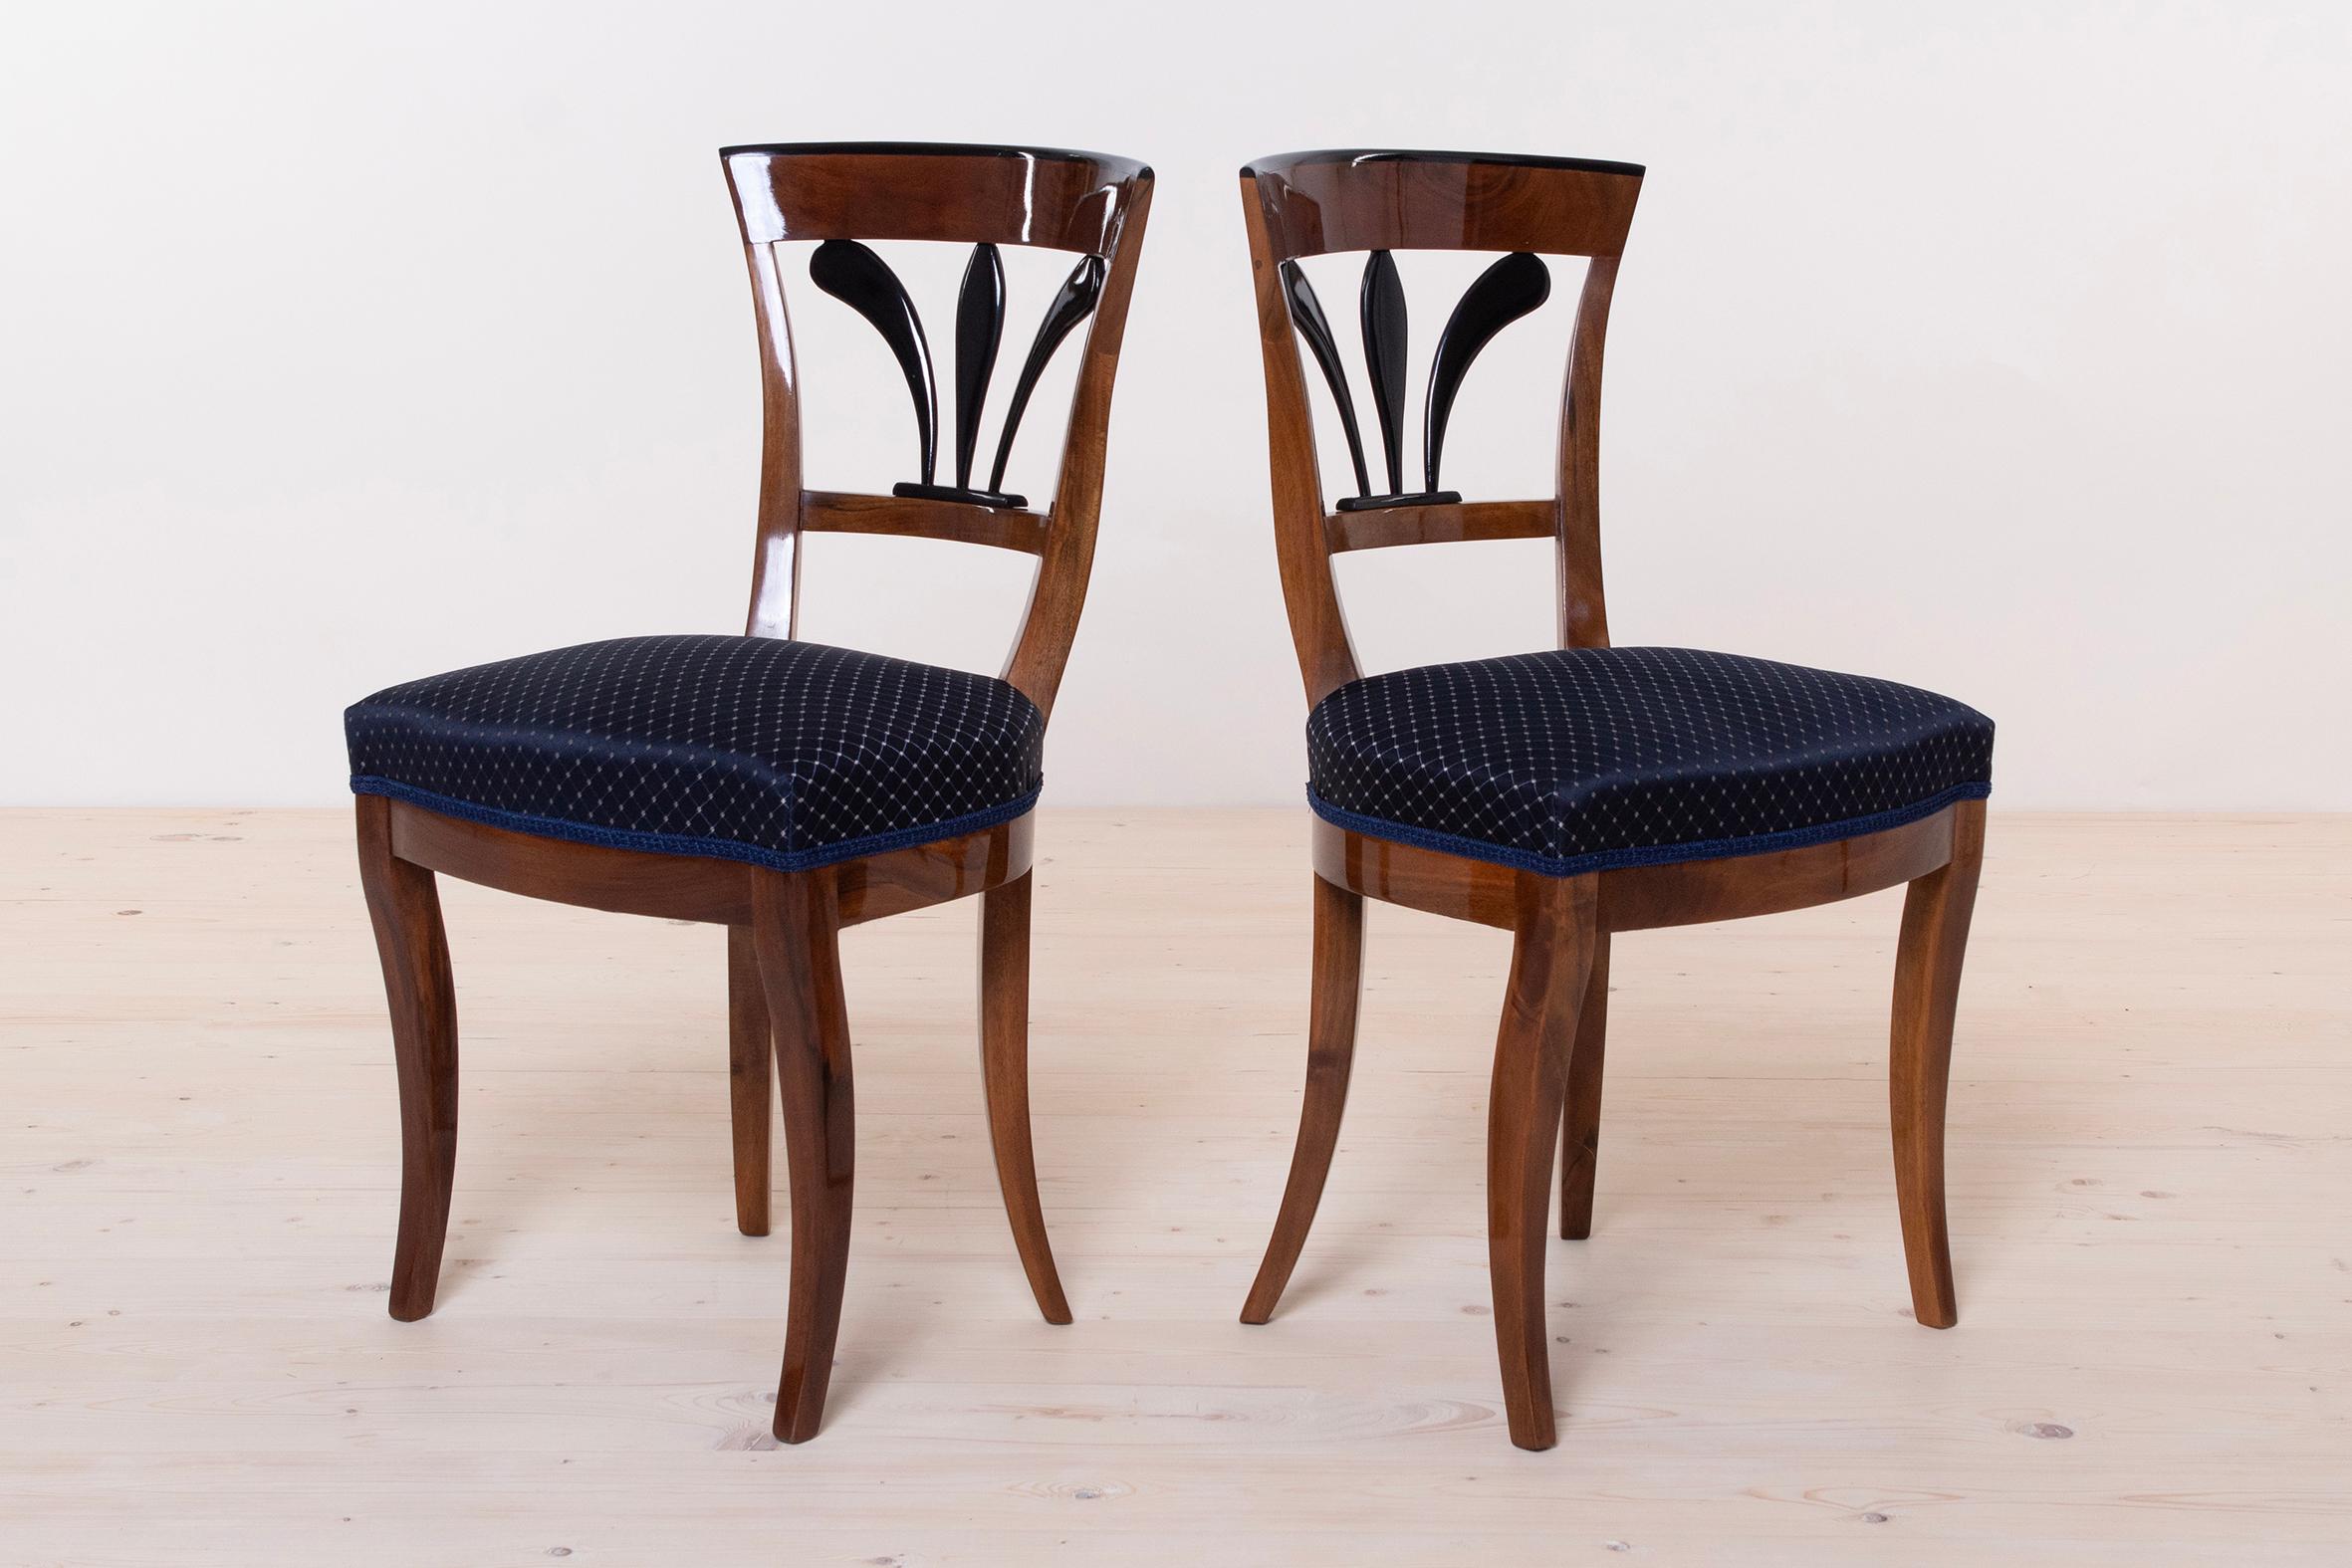 This set of two chairs comes from Germany from the Biedermeier period - 19th Century. The chairs are made of walnut wood. The set is after complete renovation. All wooden elements have been cleaned and refinished with shellac polish applied manually